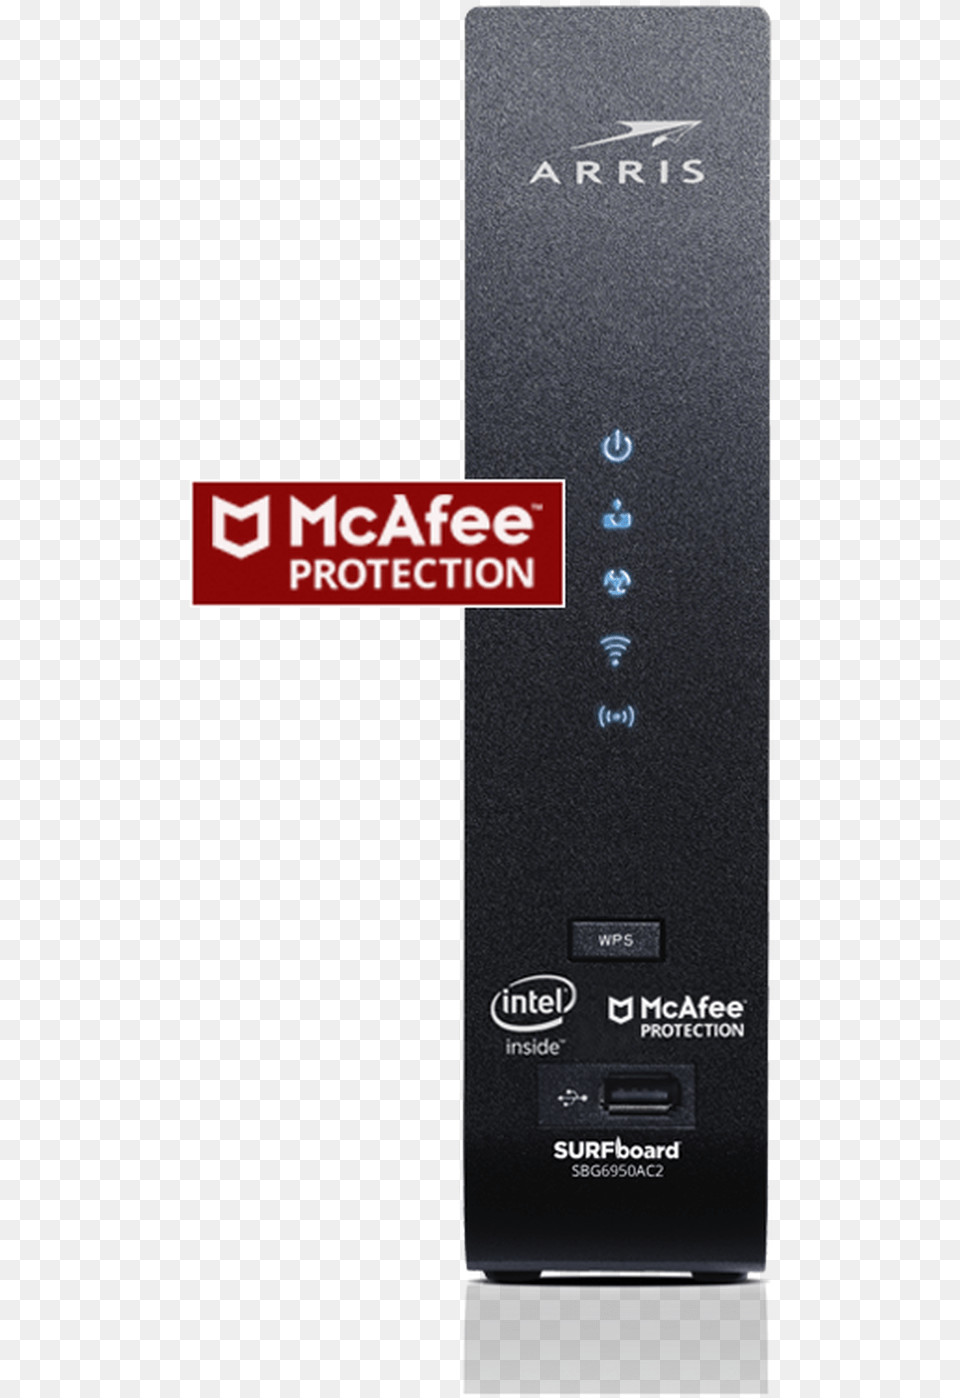 Cable Modem Amp Wi Fi Router With Mcafee Cosmetics, Electronics, Hardware, Bottle Free Png